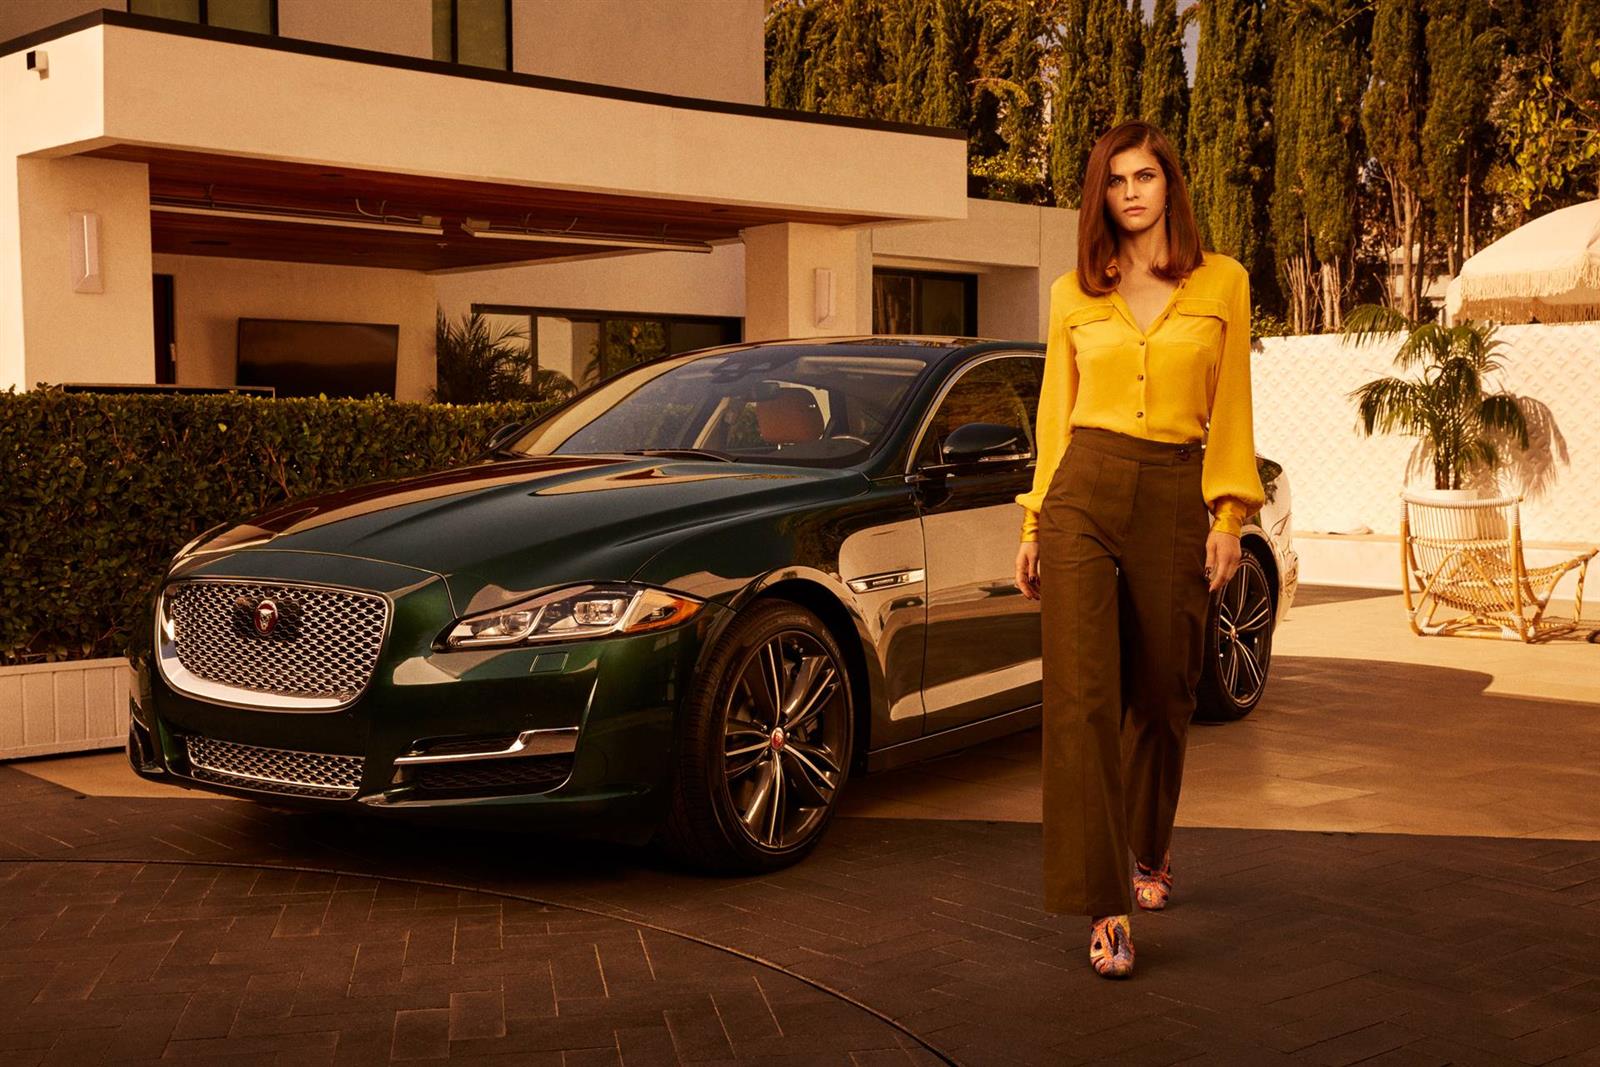 2020 Jaguar XJ Collection Special Edition Image. Photo 3 of 5